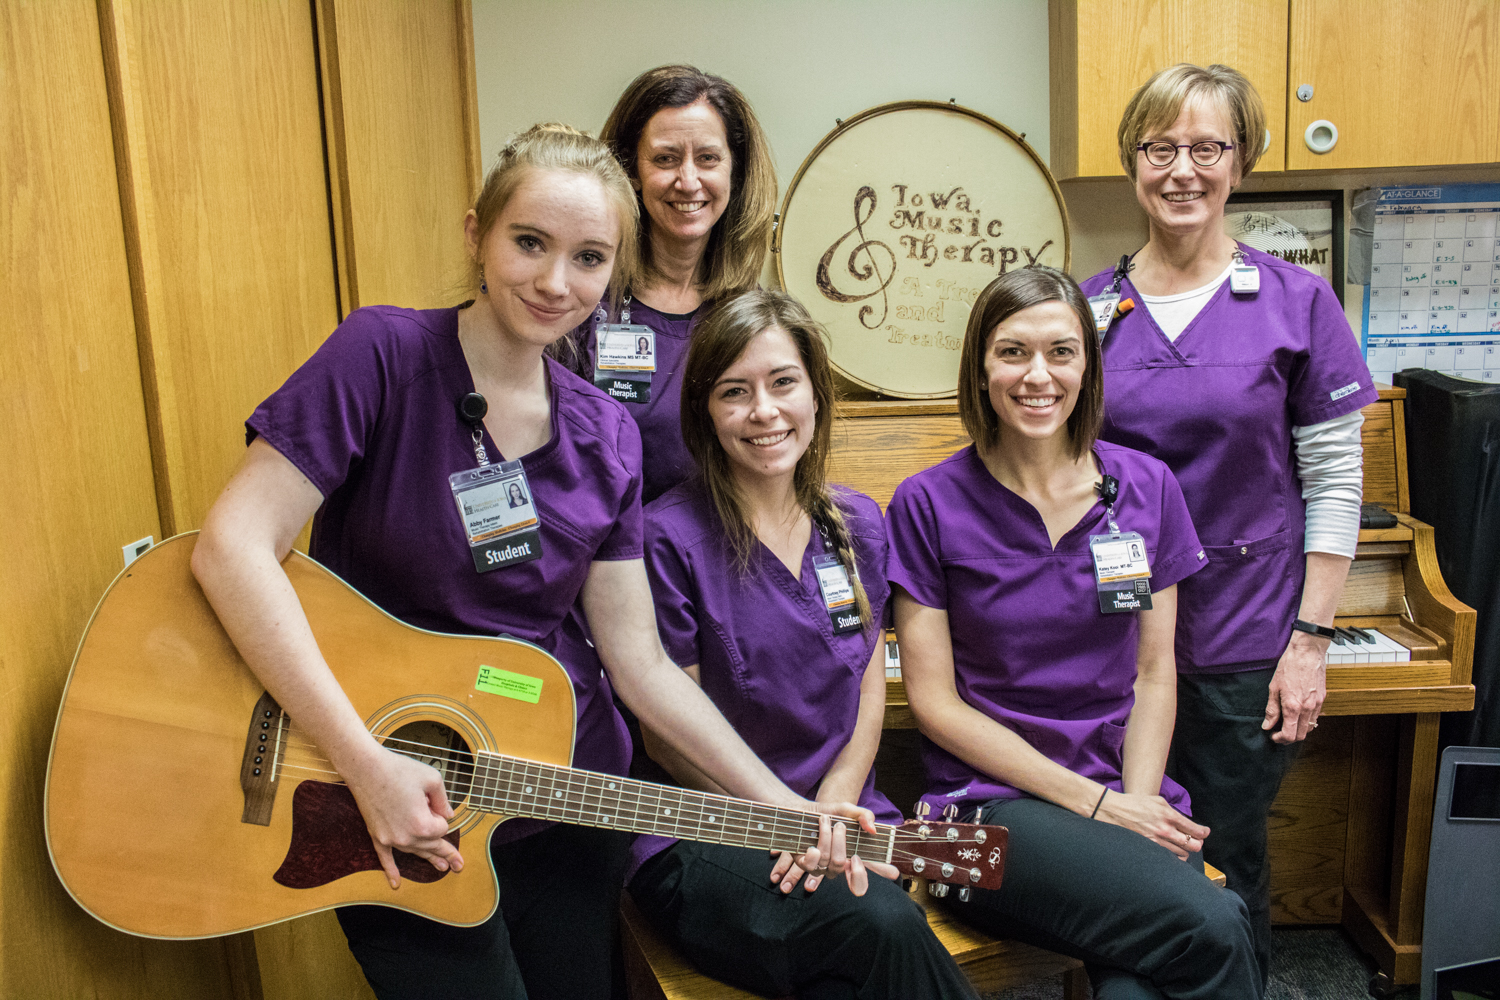 Iowa City music therapists celebrate by bringing awareness to the